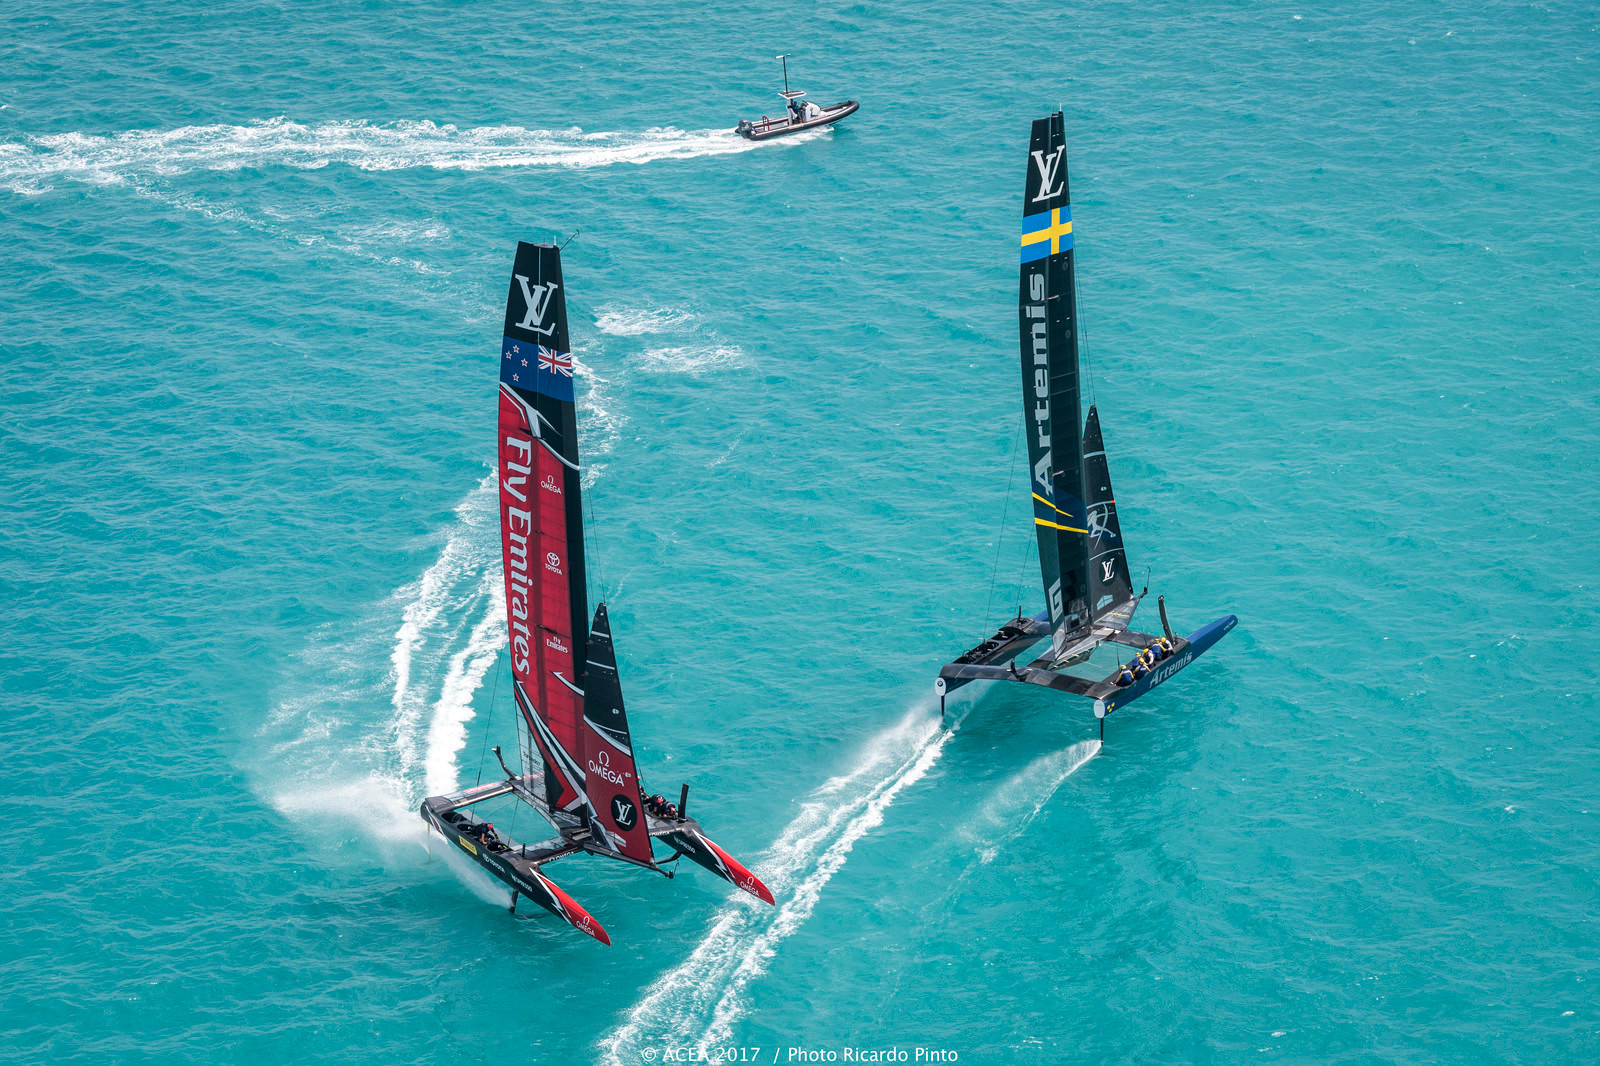 File:Emirates Team New Zealand at the Louis Vuitton Cup 2013.jpg